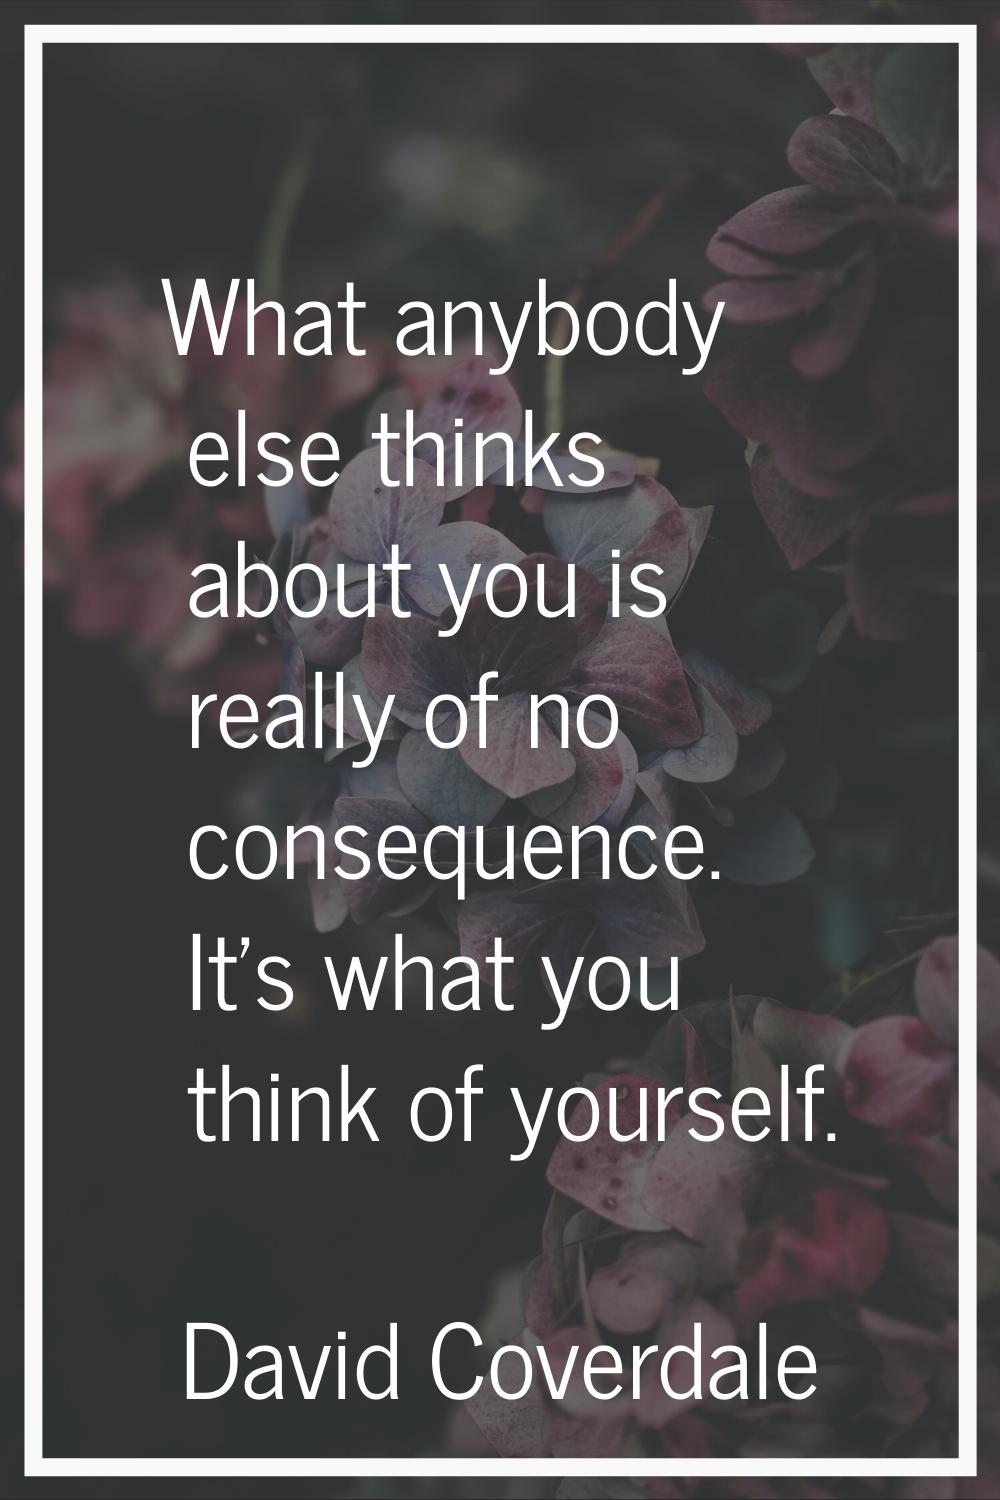 What anybody else thinks about you is really of no consequence. It's what you think of yourself.